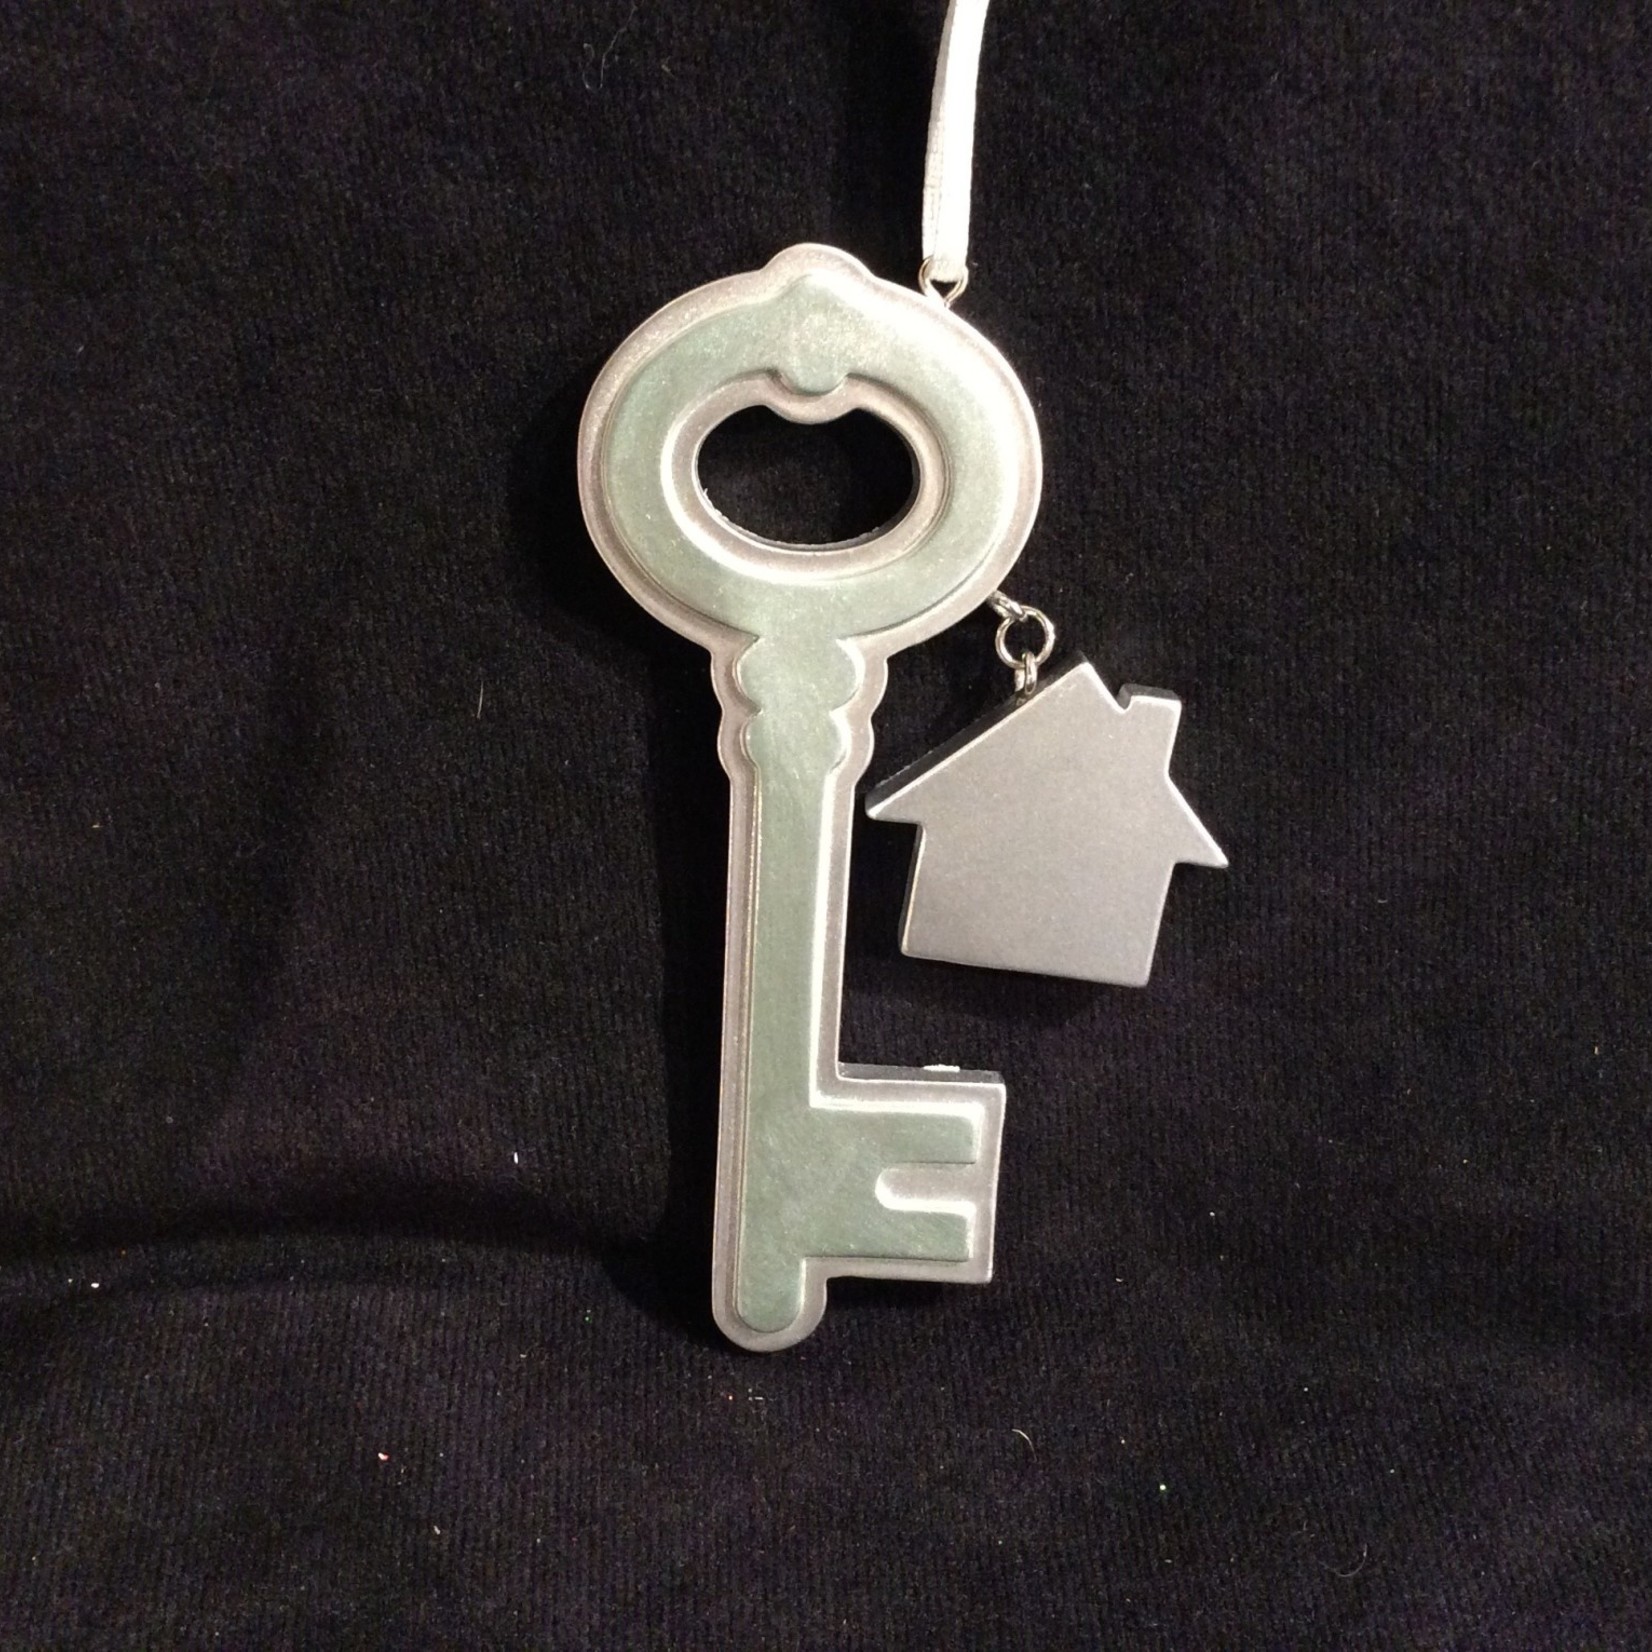 New Home Key Orn.